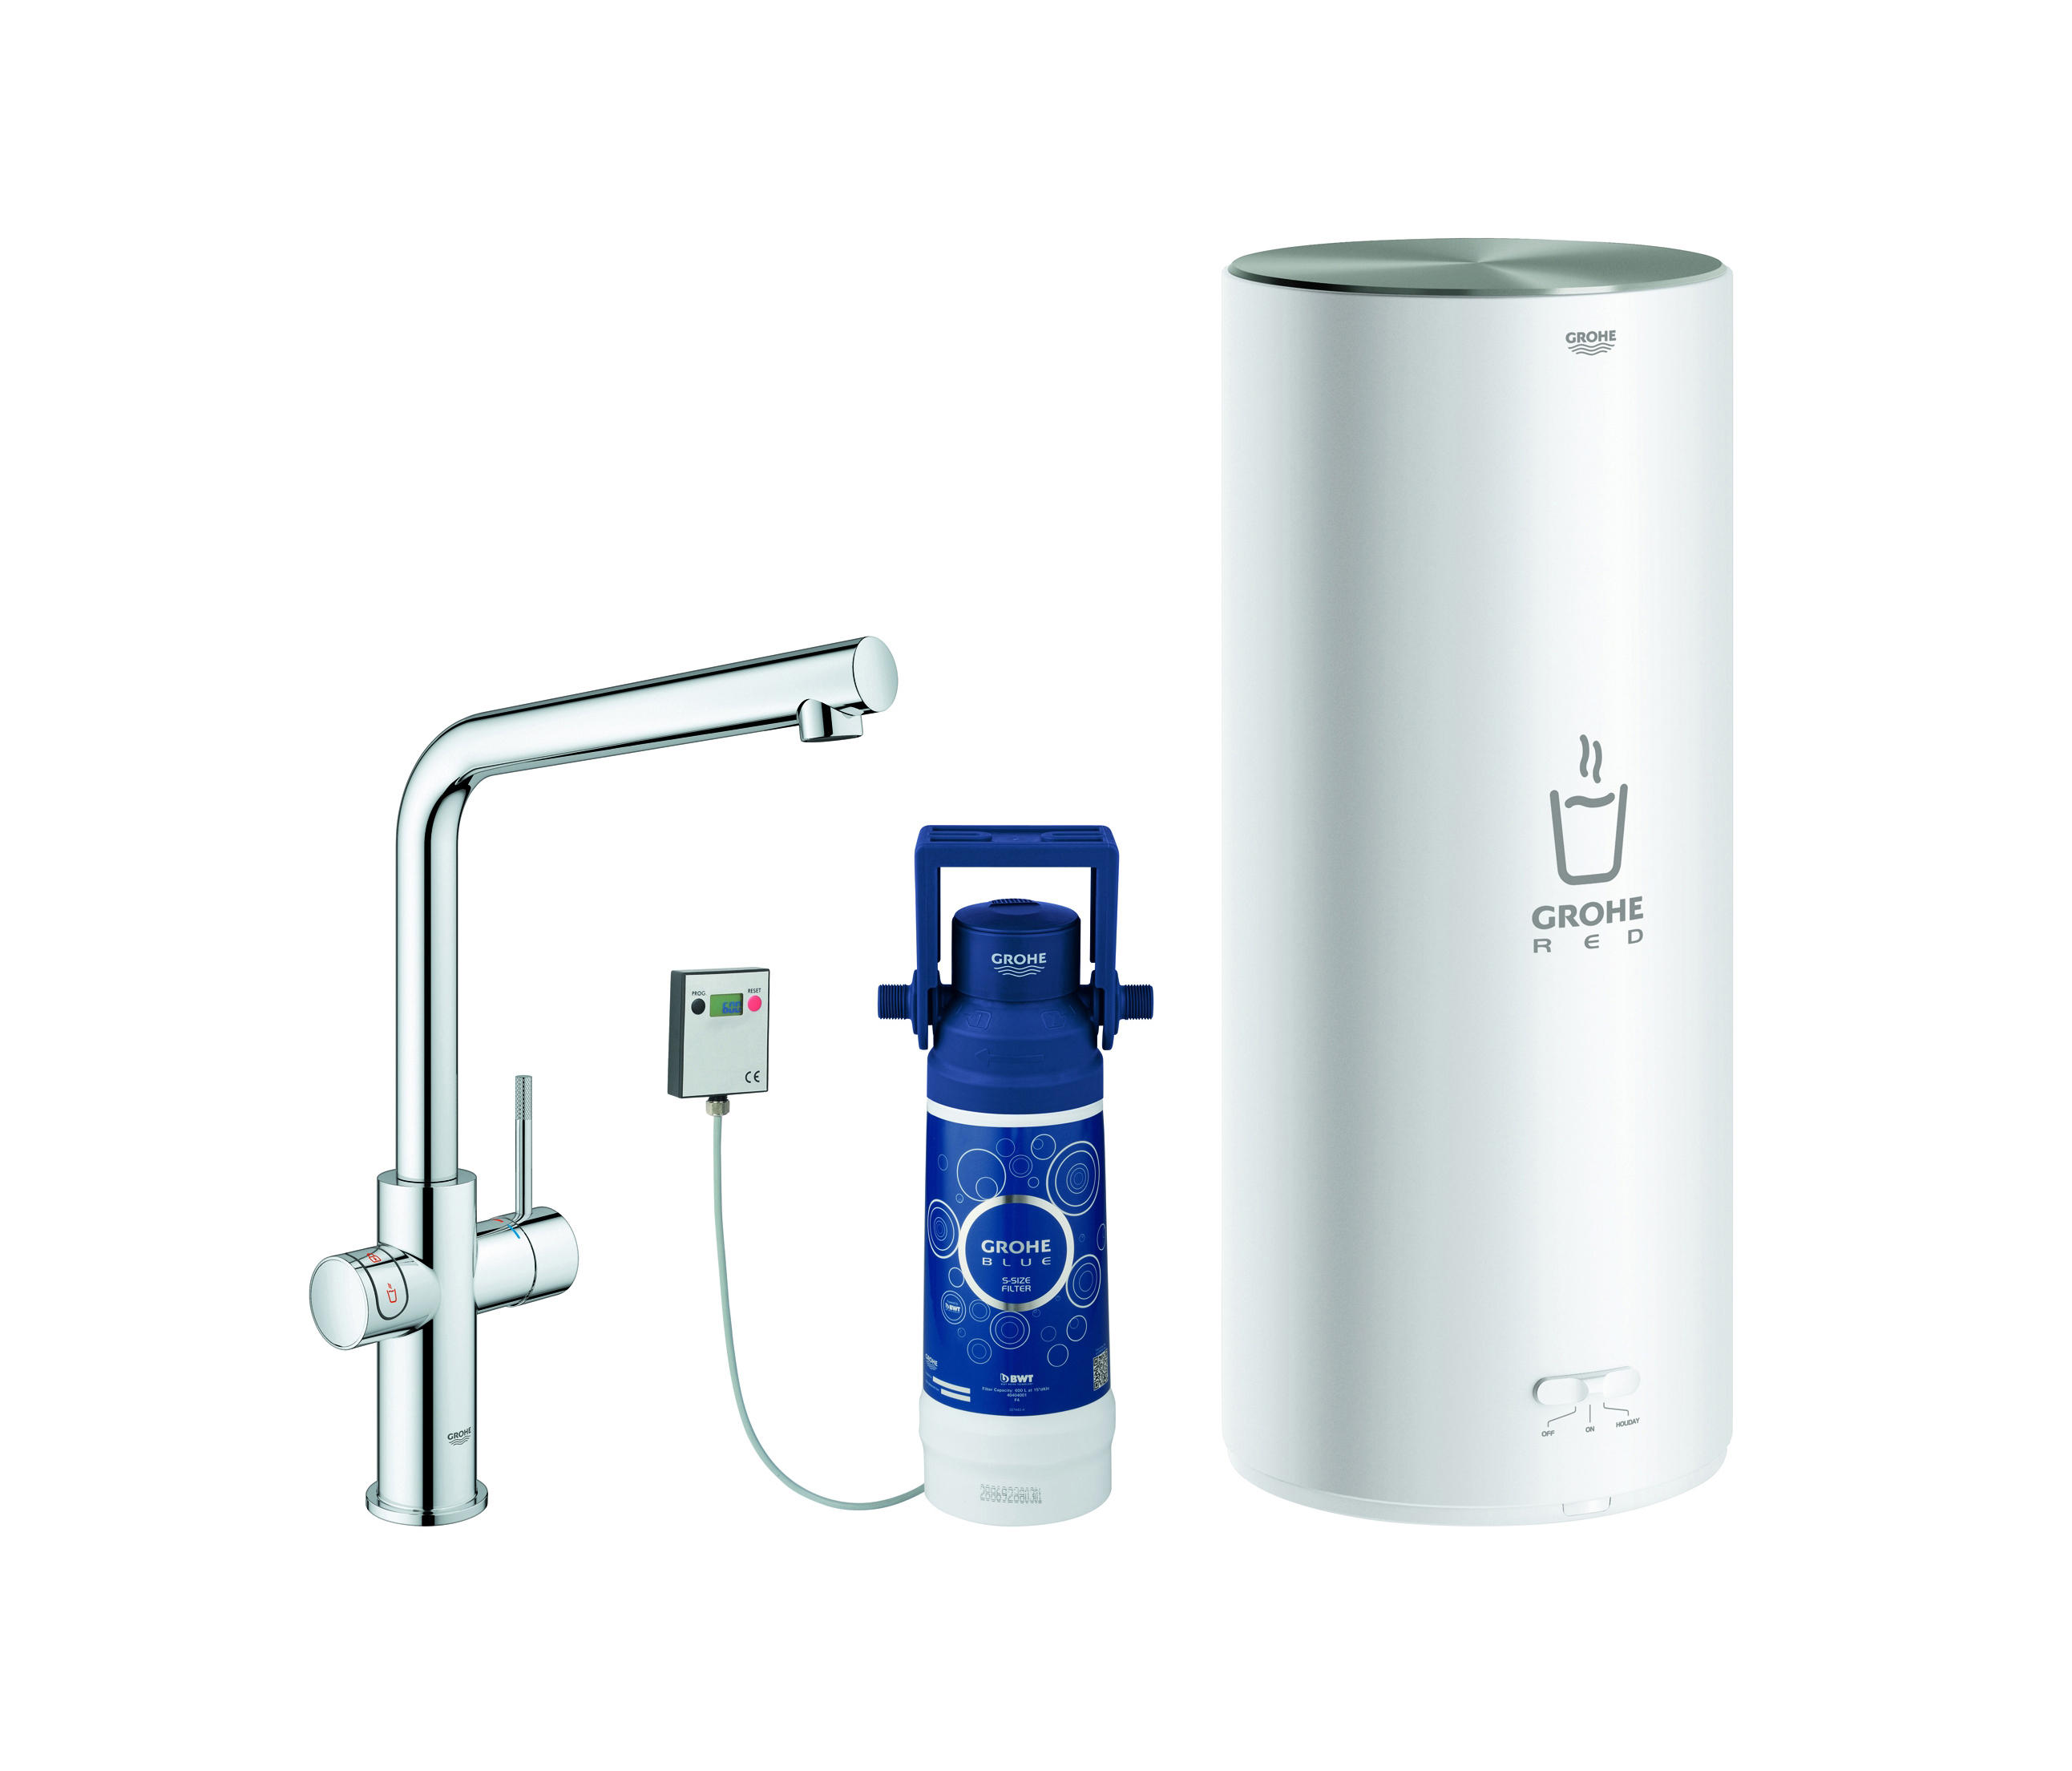 Grohe Red Duo Faucet And L Size Boiler Architonic